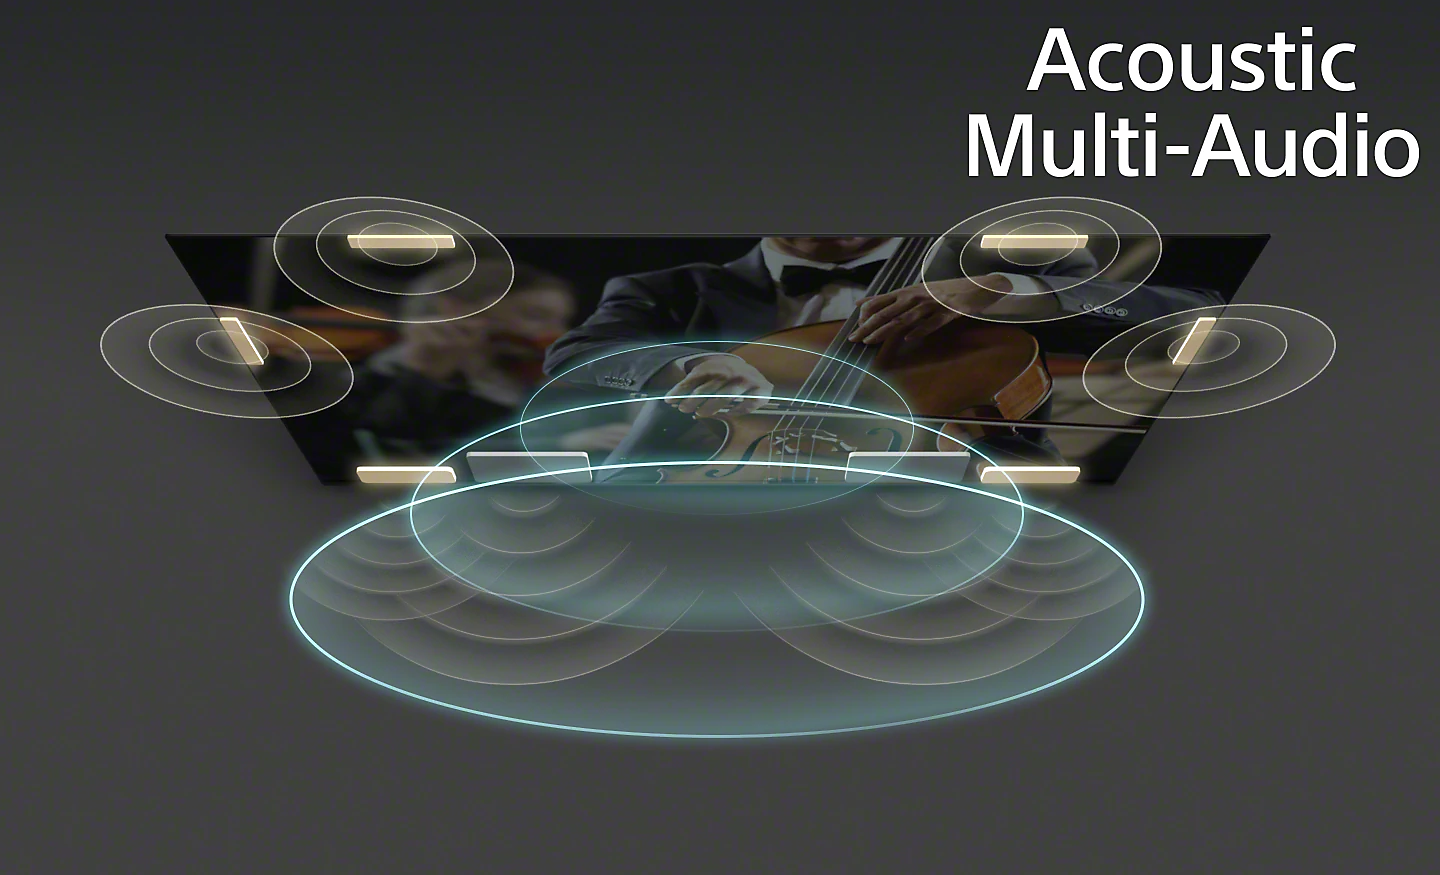 Image of soundwaves from TV with Acoustic Multi-Audio™